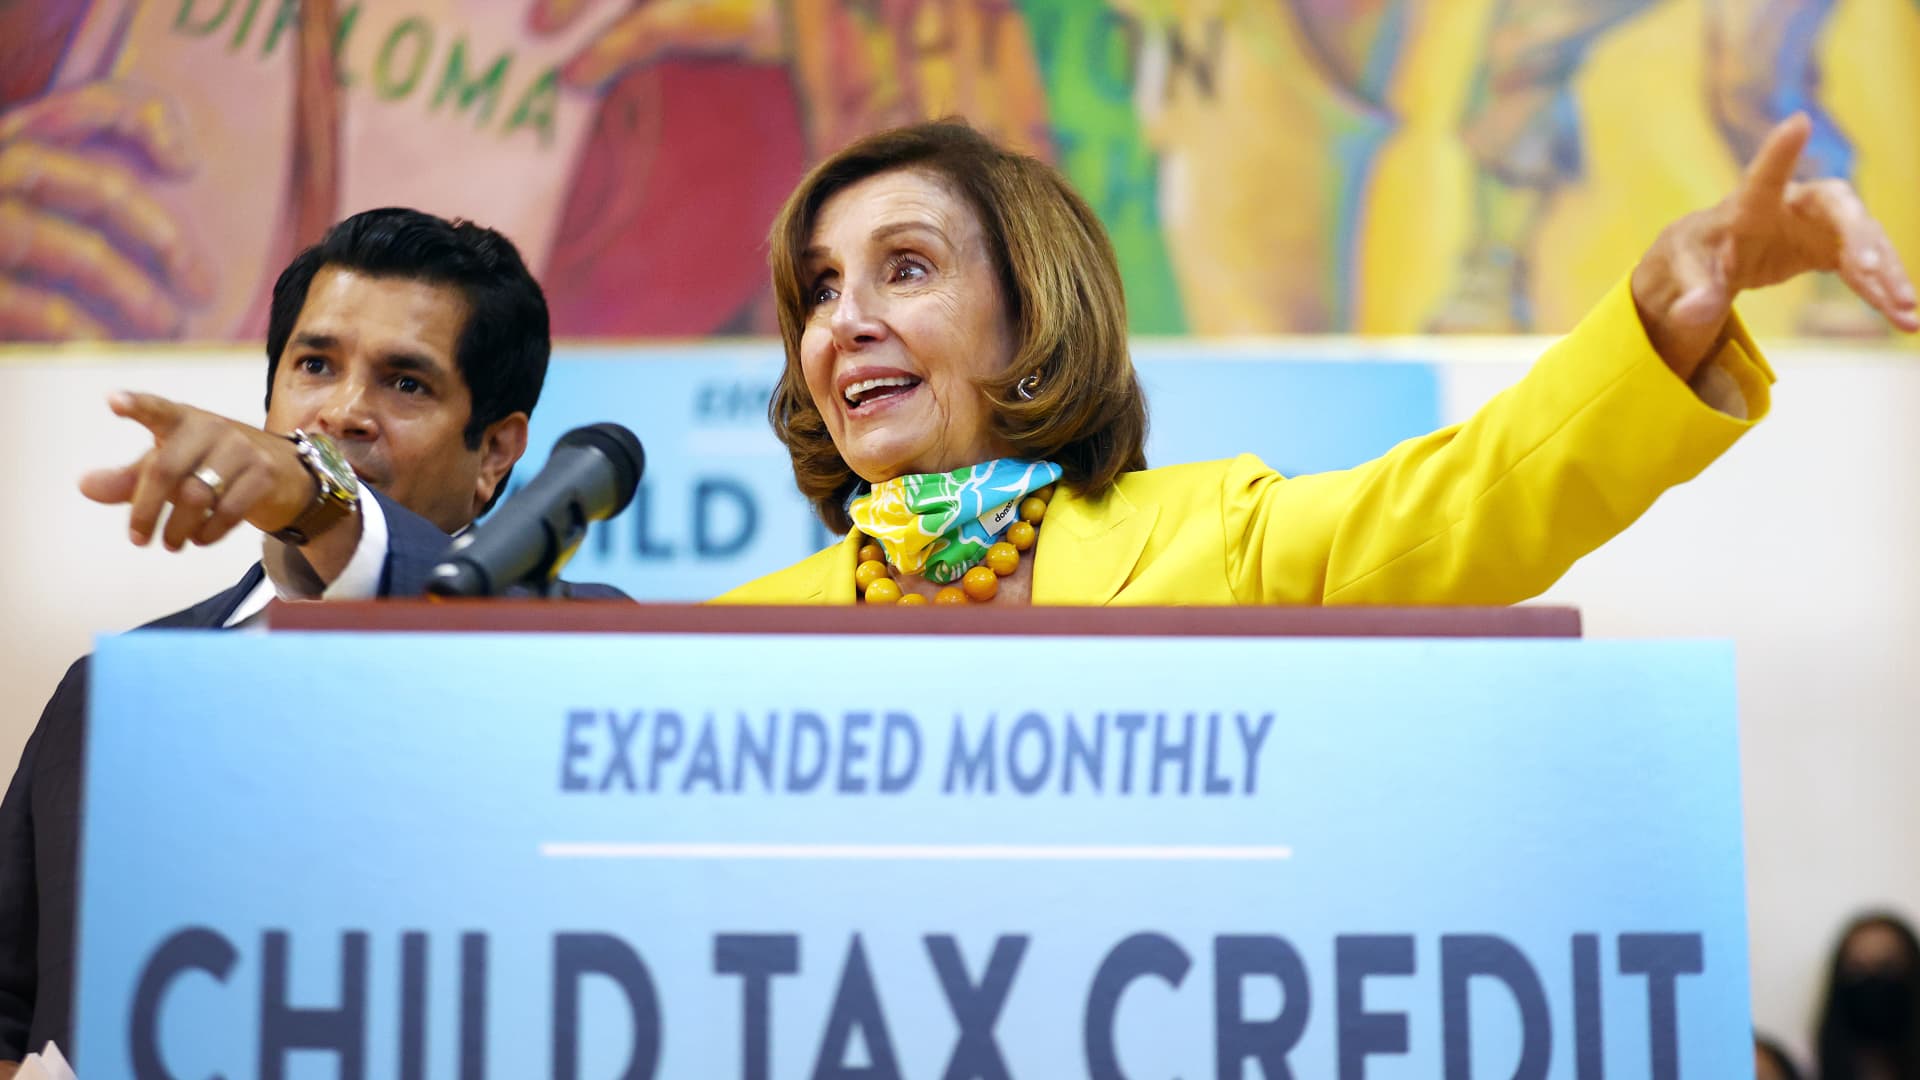 House Speaker Nancy Pelosi, D-Calif., and Rep. Jimmy Gomez, D-Calif., at a press conference about the child tax credit at the Barrio Action Youth and Family Center in Los Angeles on July 15, 2021.